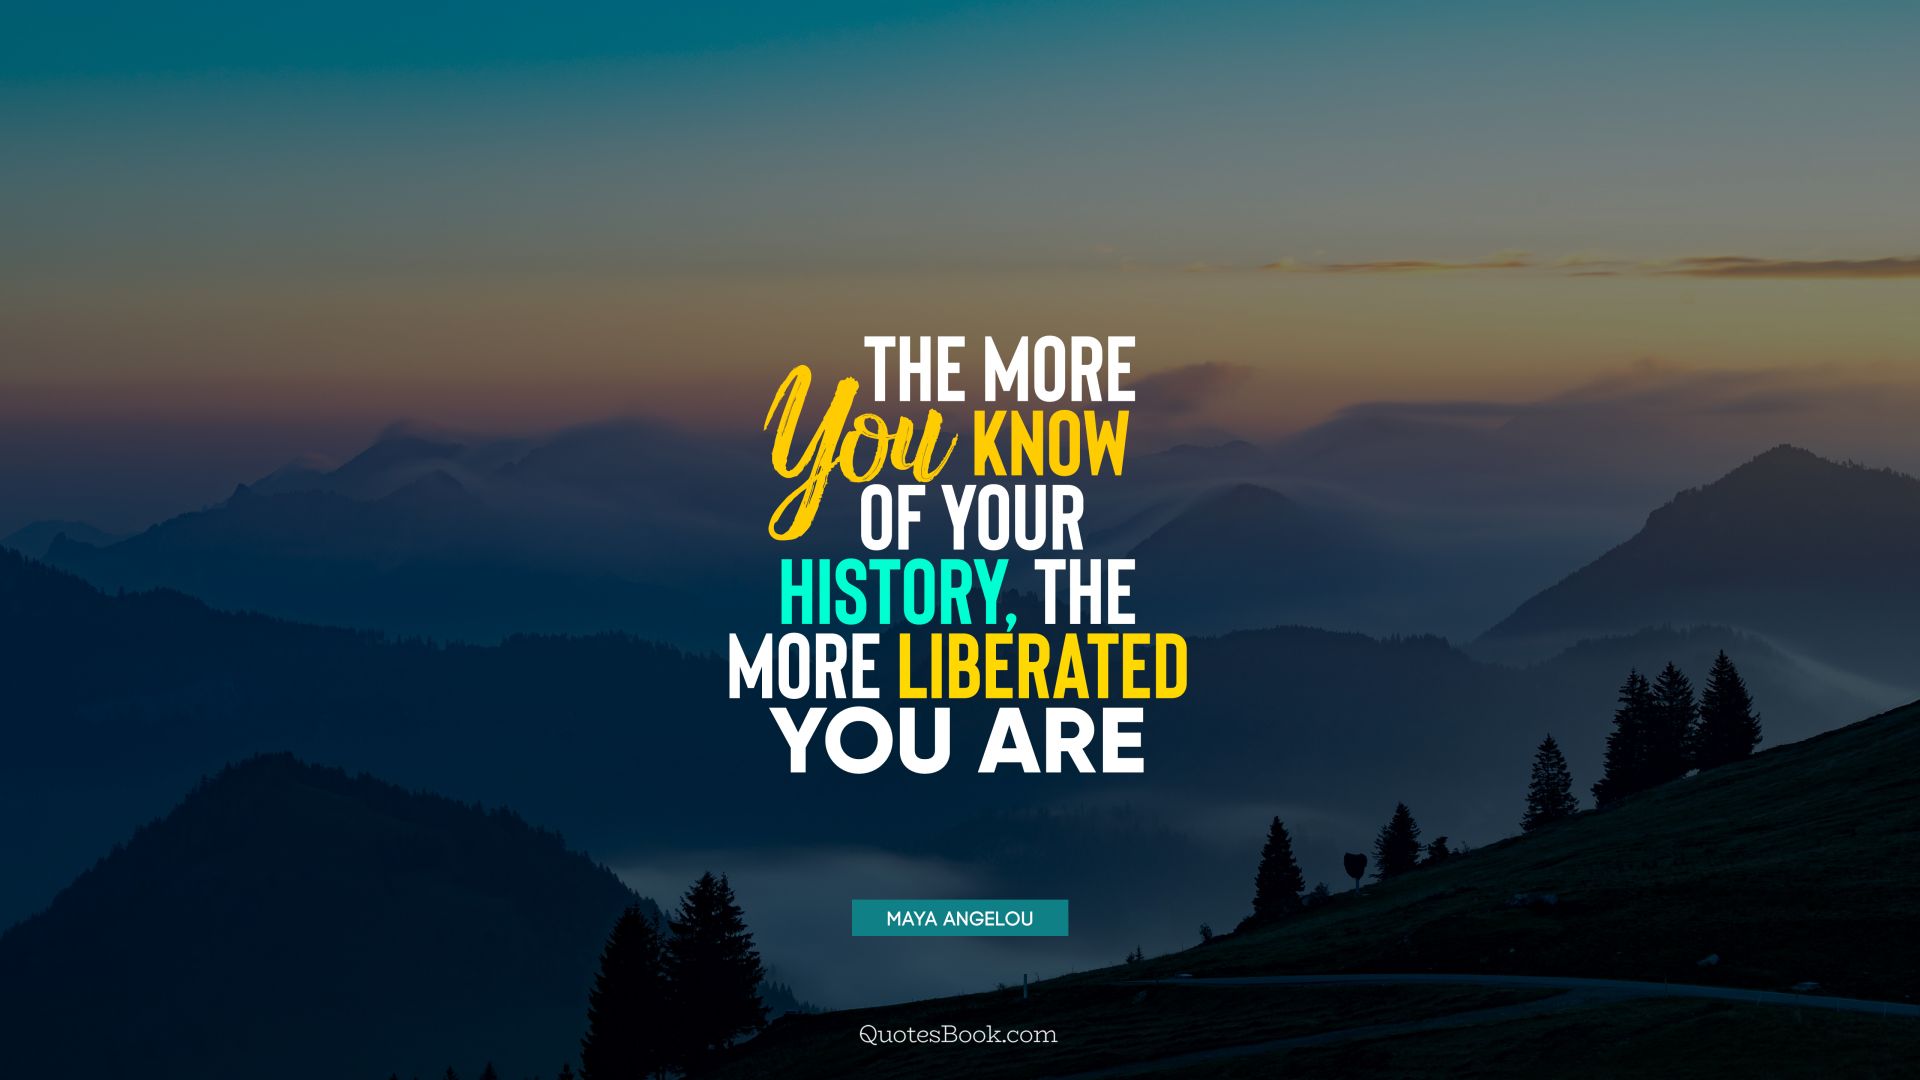 The more you know of your history, the more liberated you are. - Quote by Maya Angelou